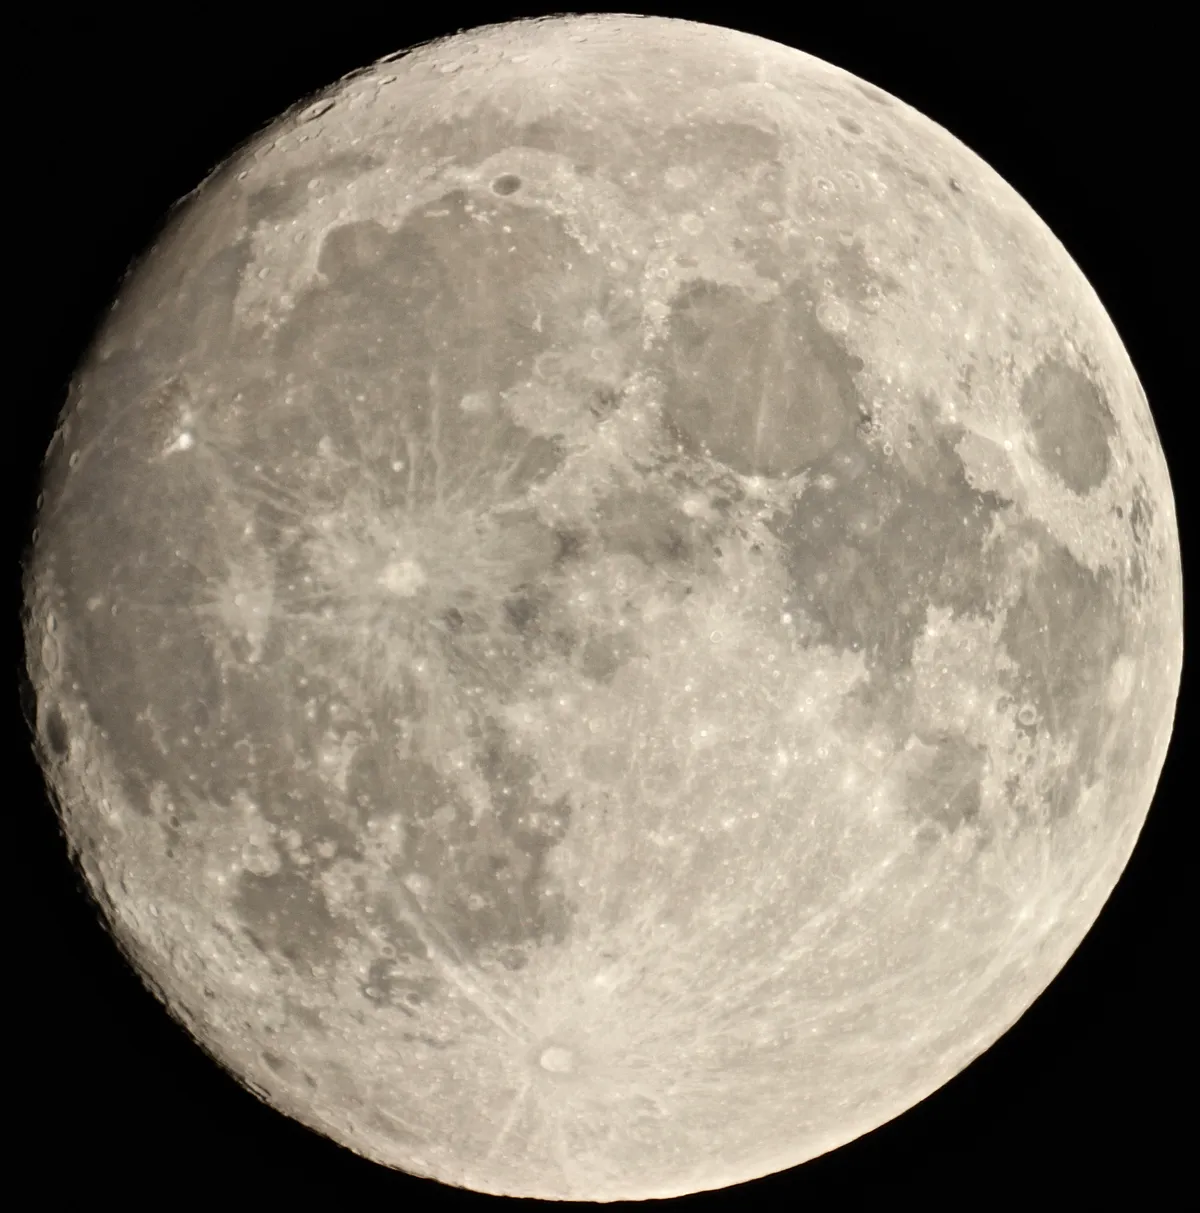 New Years Eve Moon by Sarah & Simon Fisher, Bromsgrove, Worcestershire, UK. Equipment: Canon 600D, Maksutov 127mm.